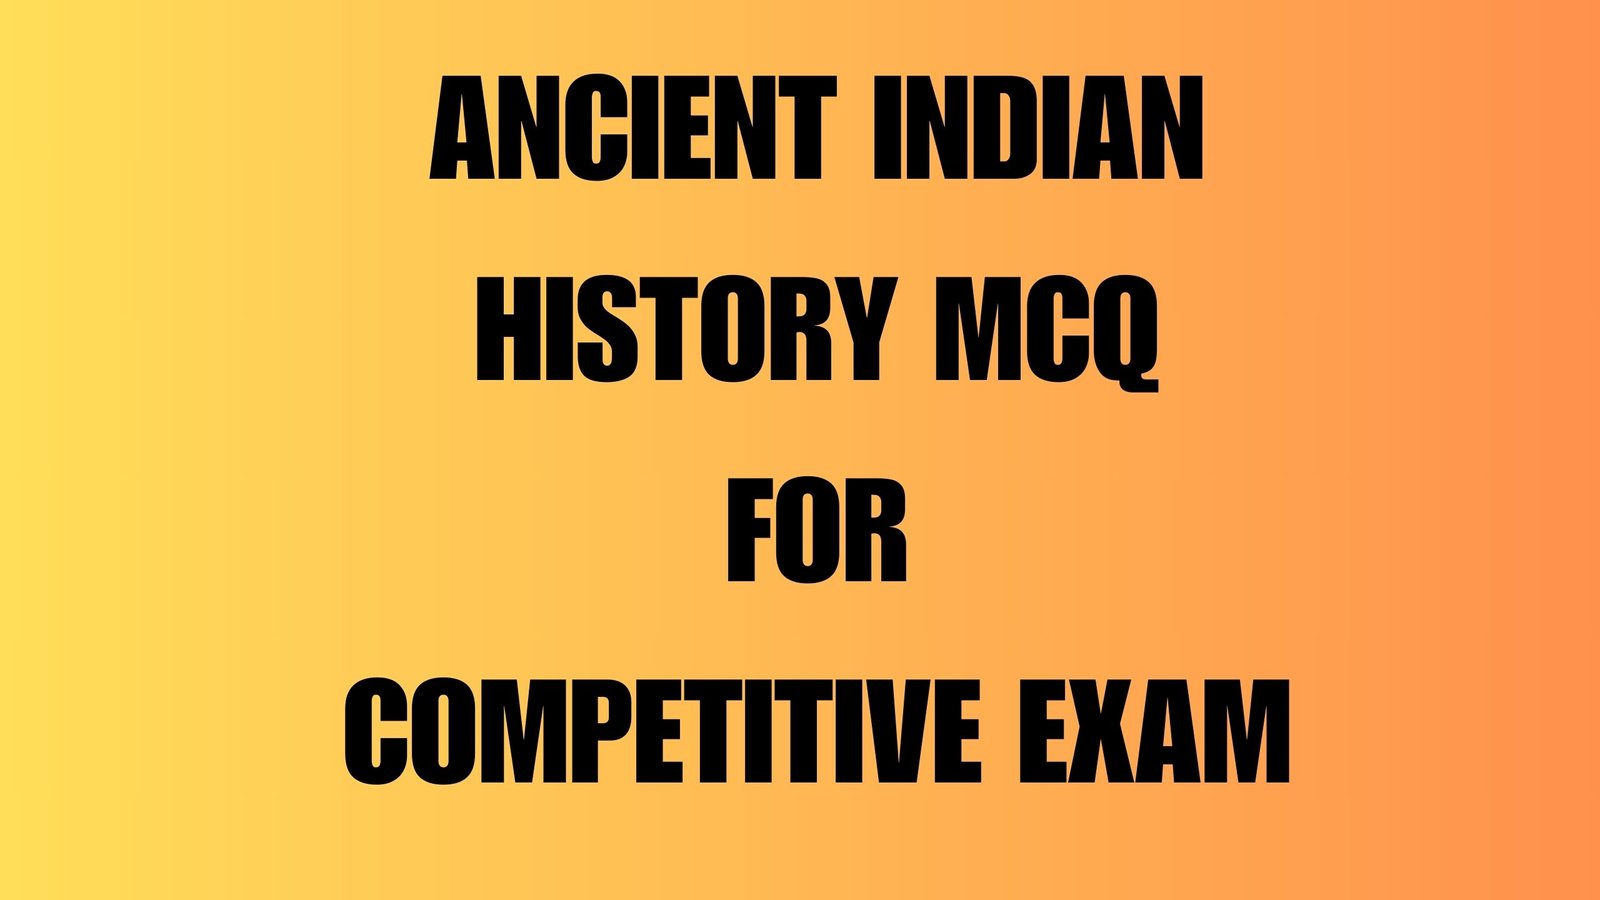 Ancient Indian History MCQ for Competitive Exam